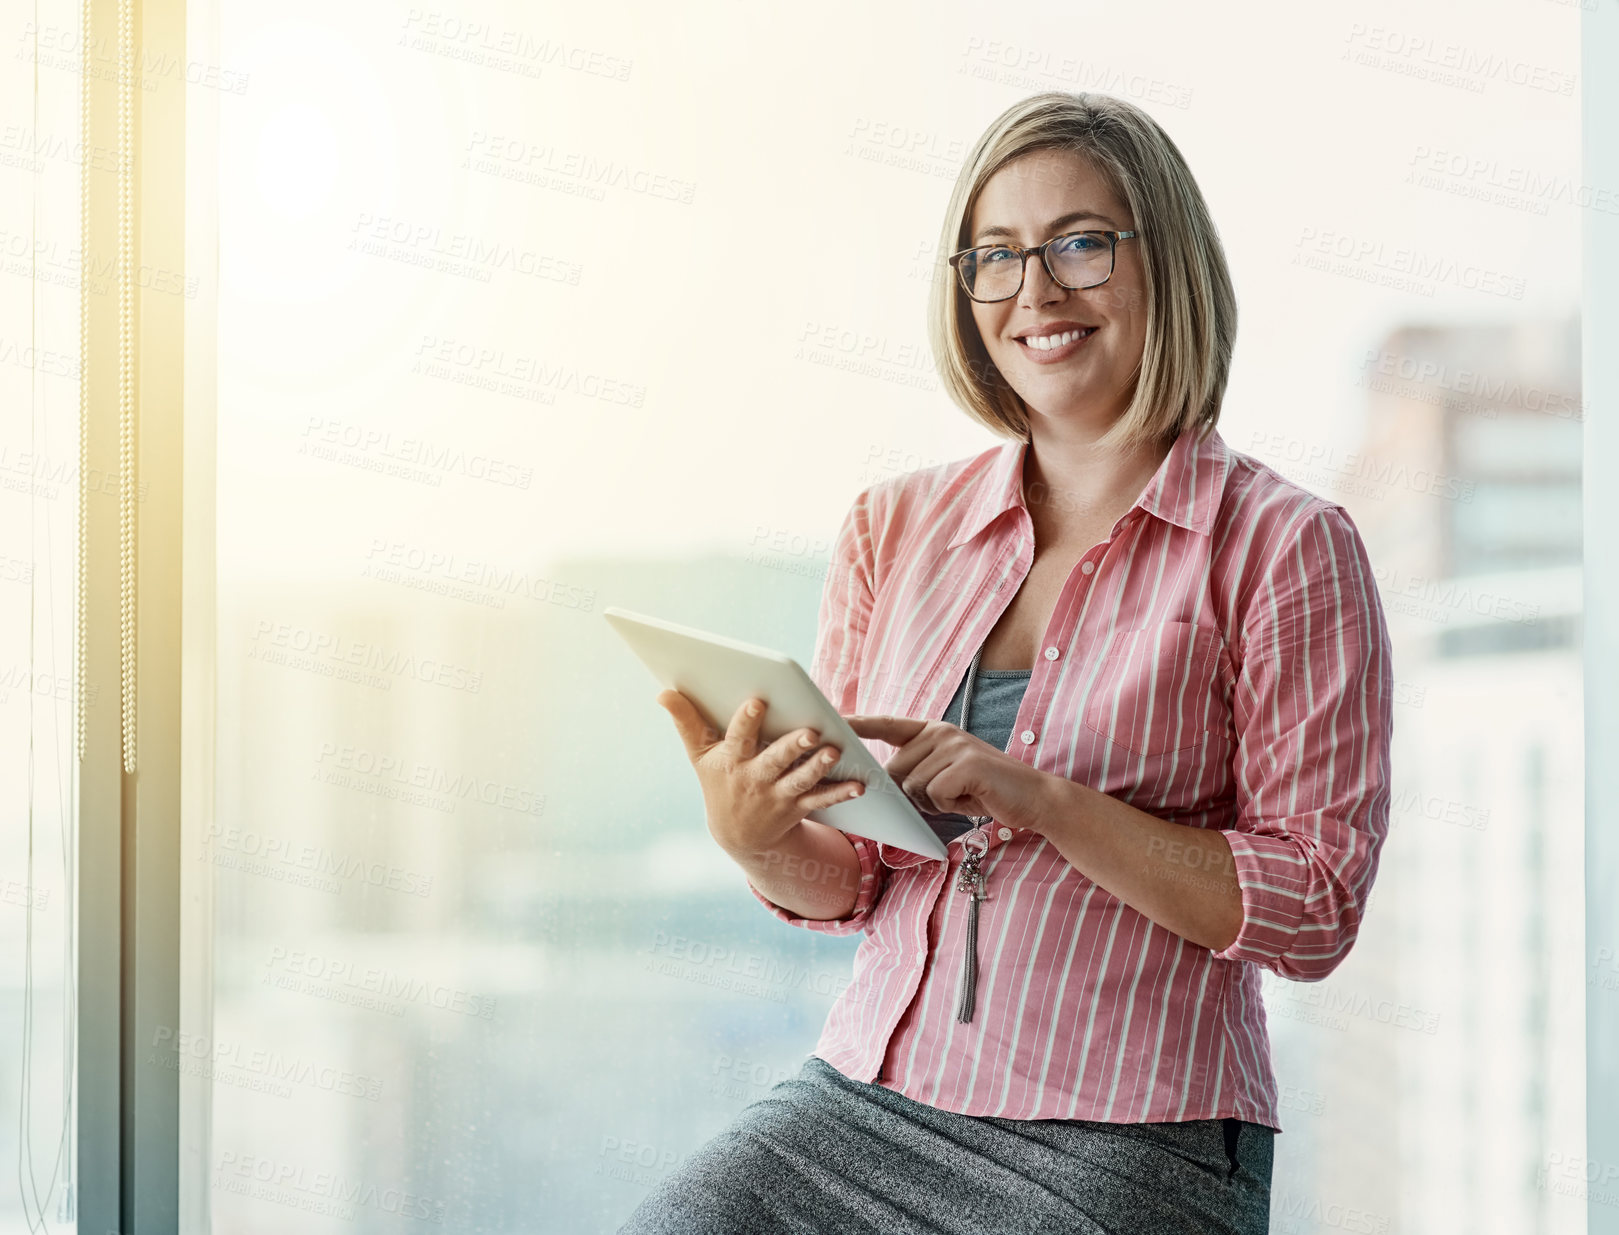 Buy stock photo Portrait of a confident businesswoman using a digital tablet in an office